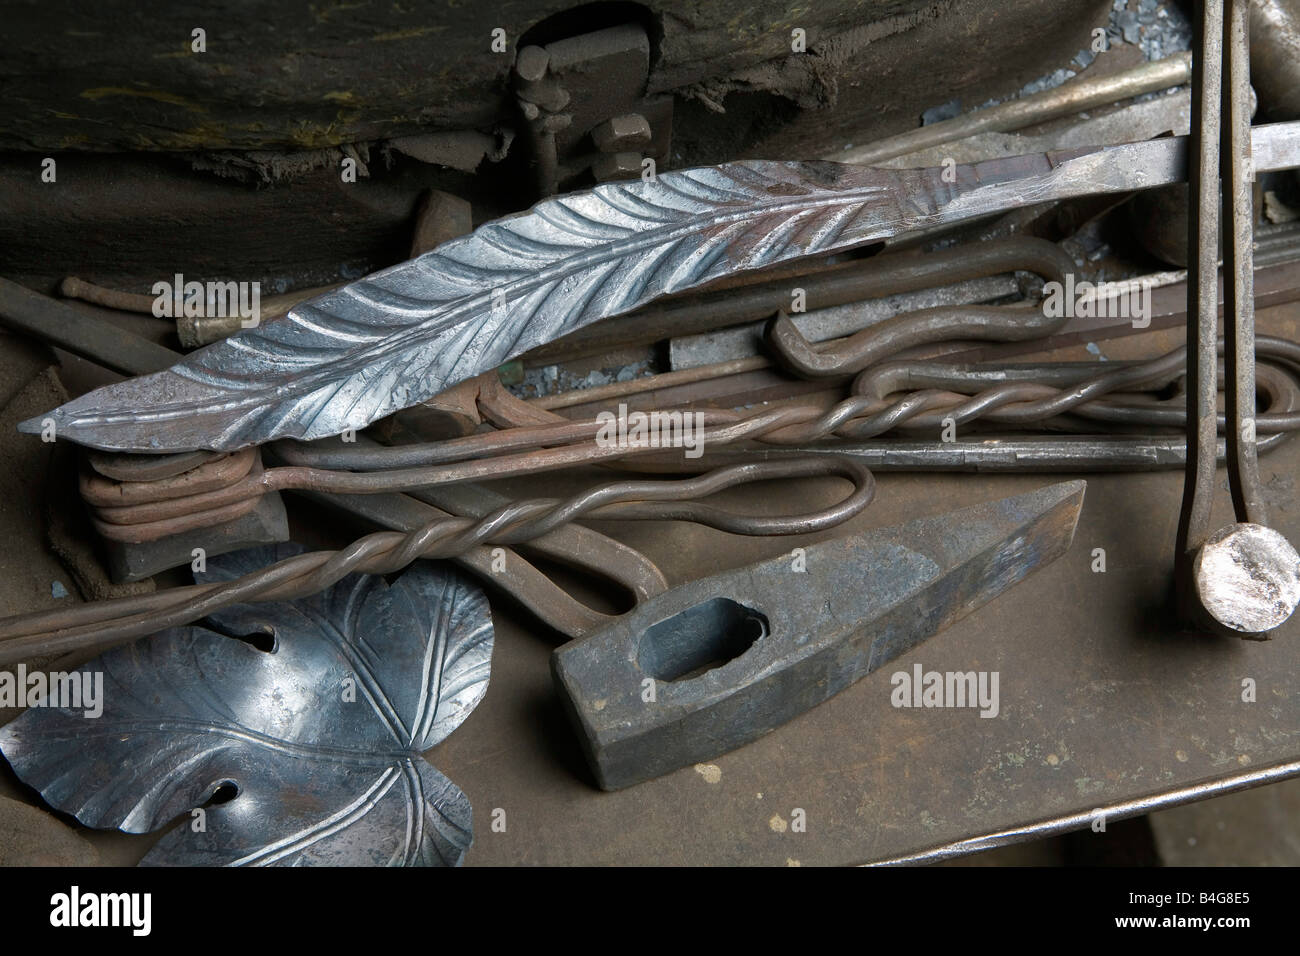 Pieces of crafted metal and metalwork tools Stock Photo